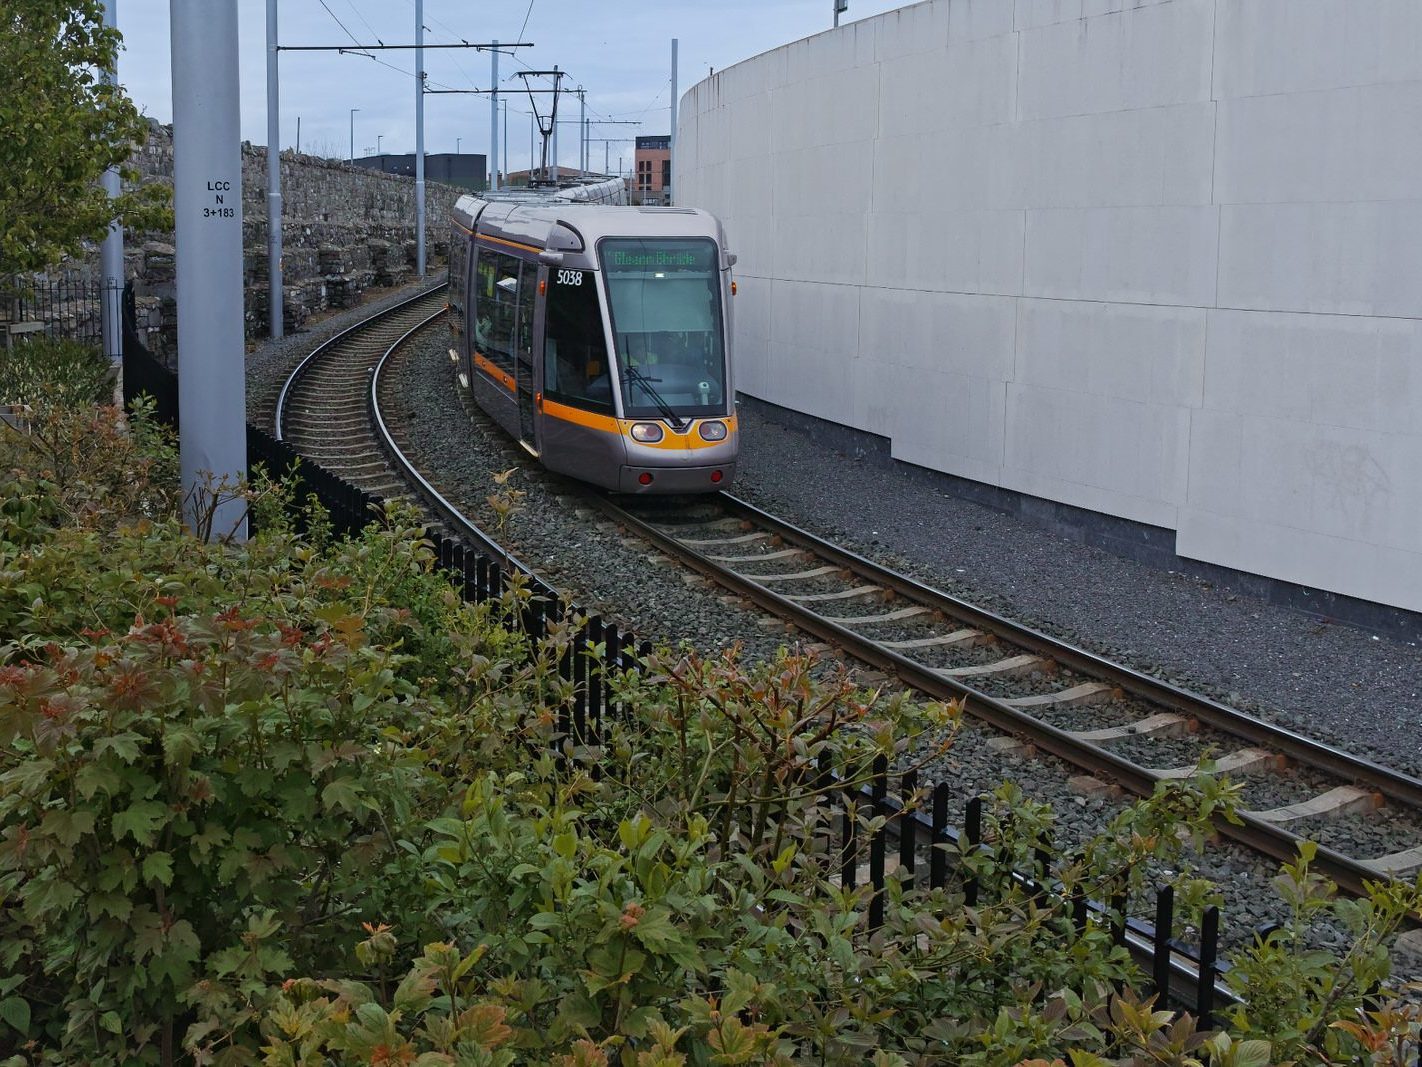 LUAS TRAM STOP AT BROADSTONE AND THE ENTRANCE TO GRANGEGORMAN UNIVERSITY CAMPUS 021